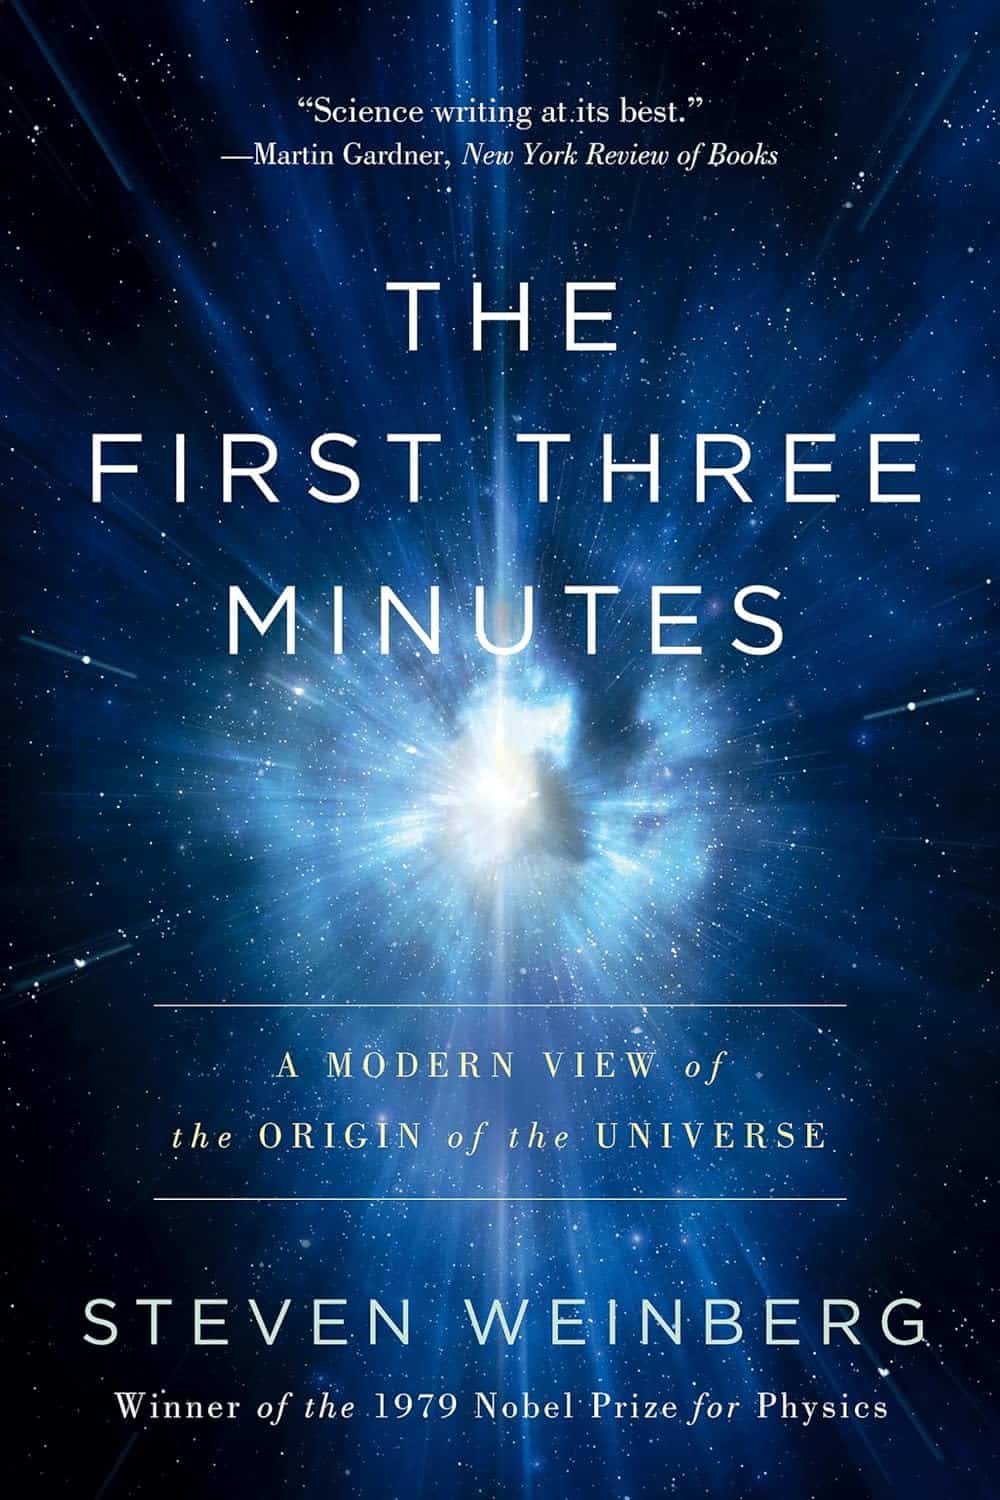 The First Three Minutes by Steven Weinberg (1977)